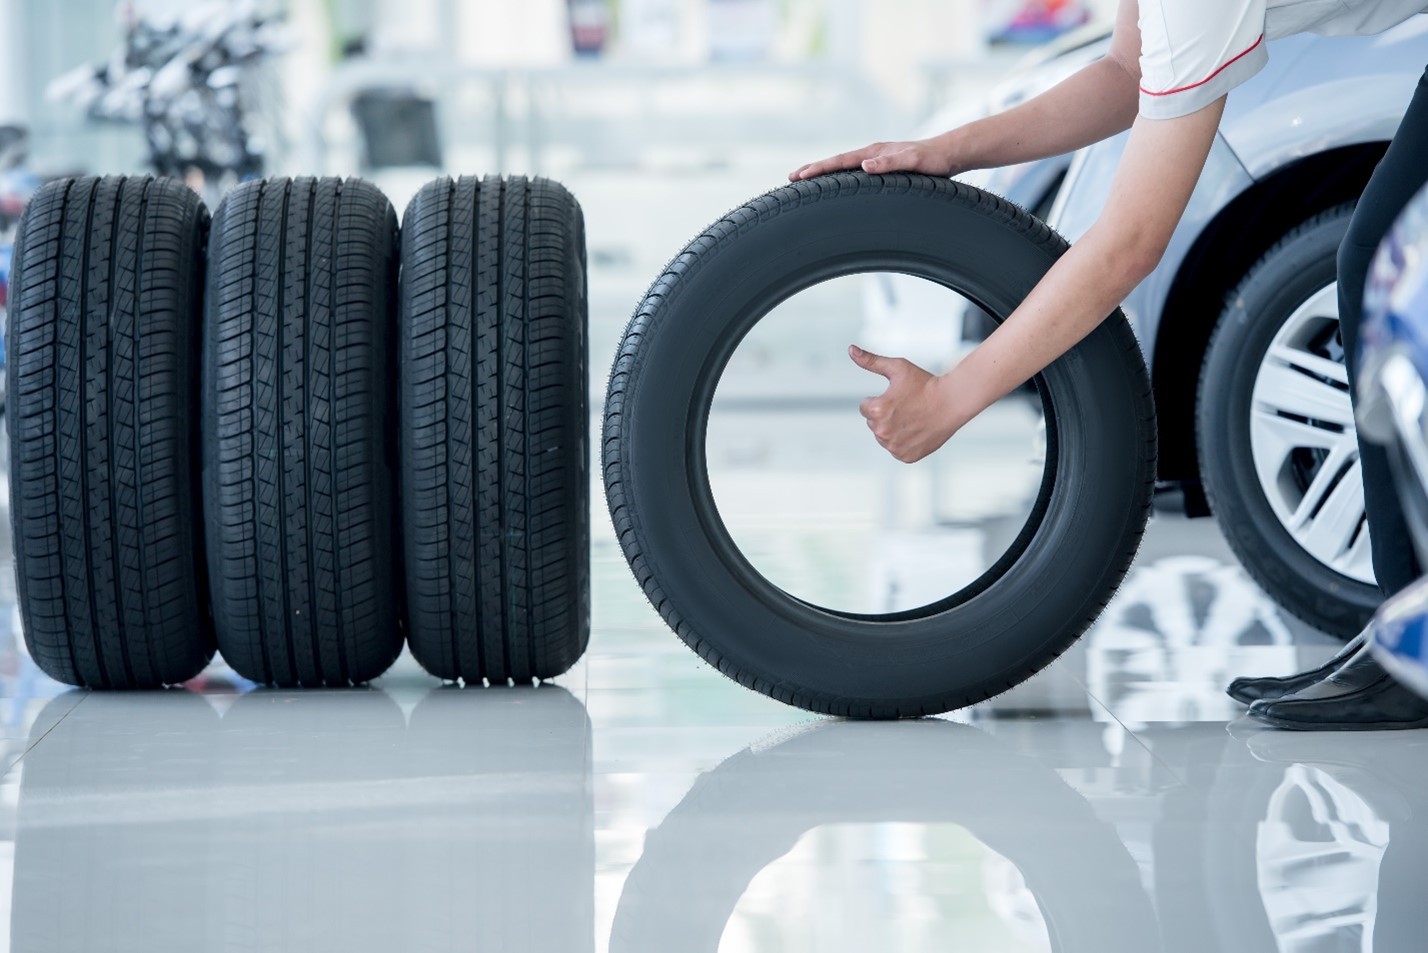 Different Types of Tires | How to Determine Which Type You Need